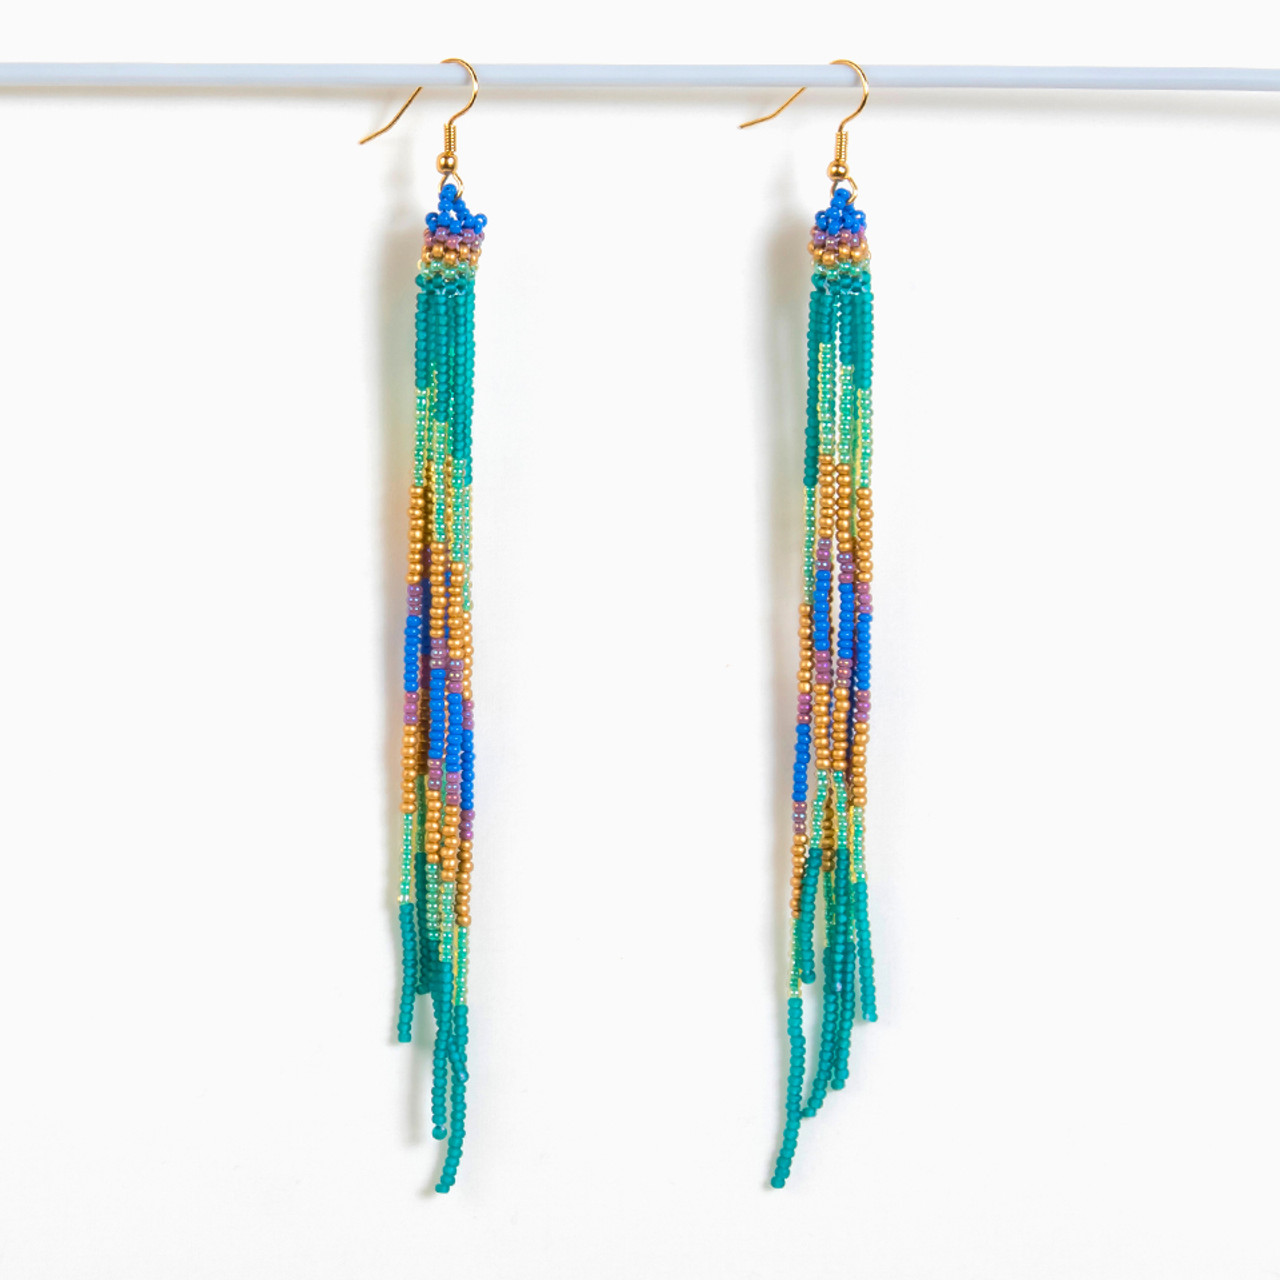 Guatemalan Ombre Beaded Fringe Earring, Handmade Fair Trade Products